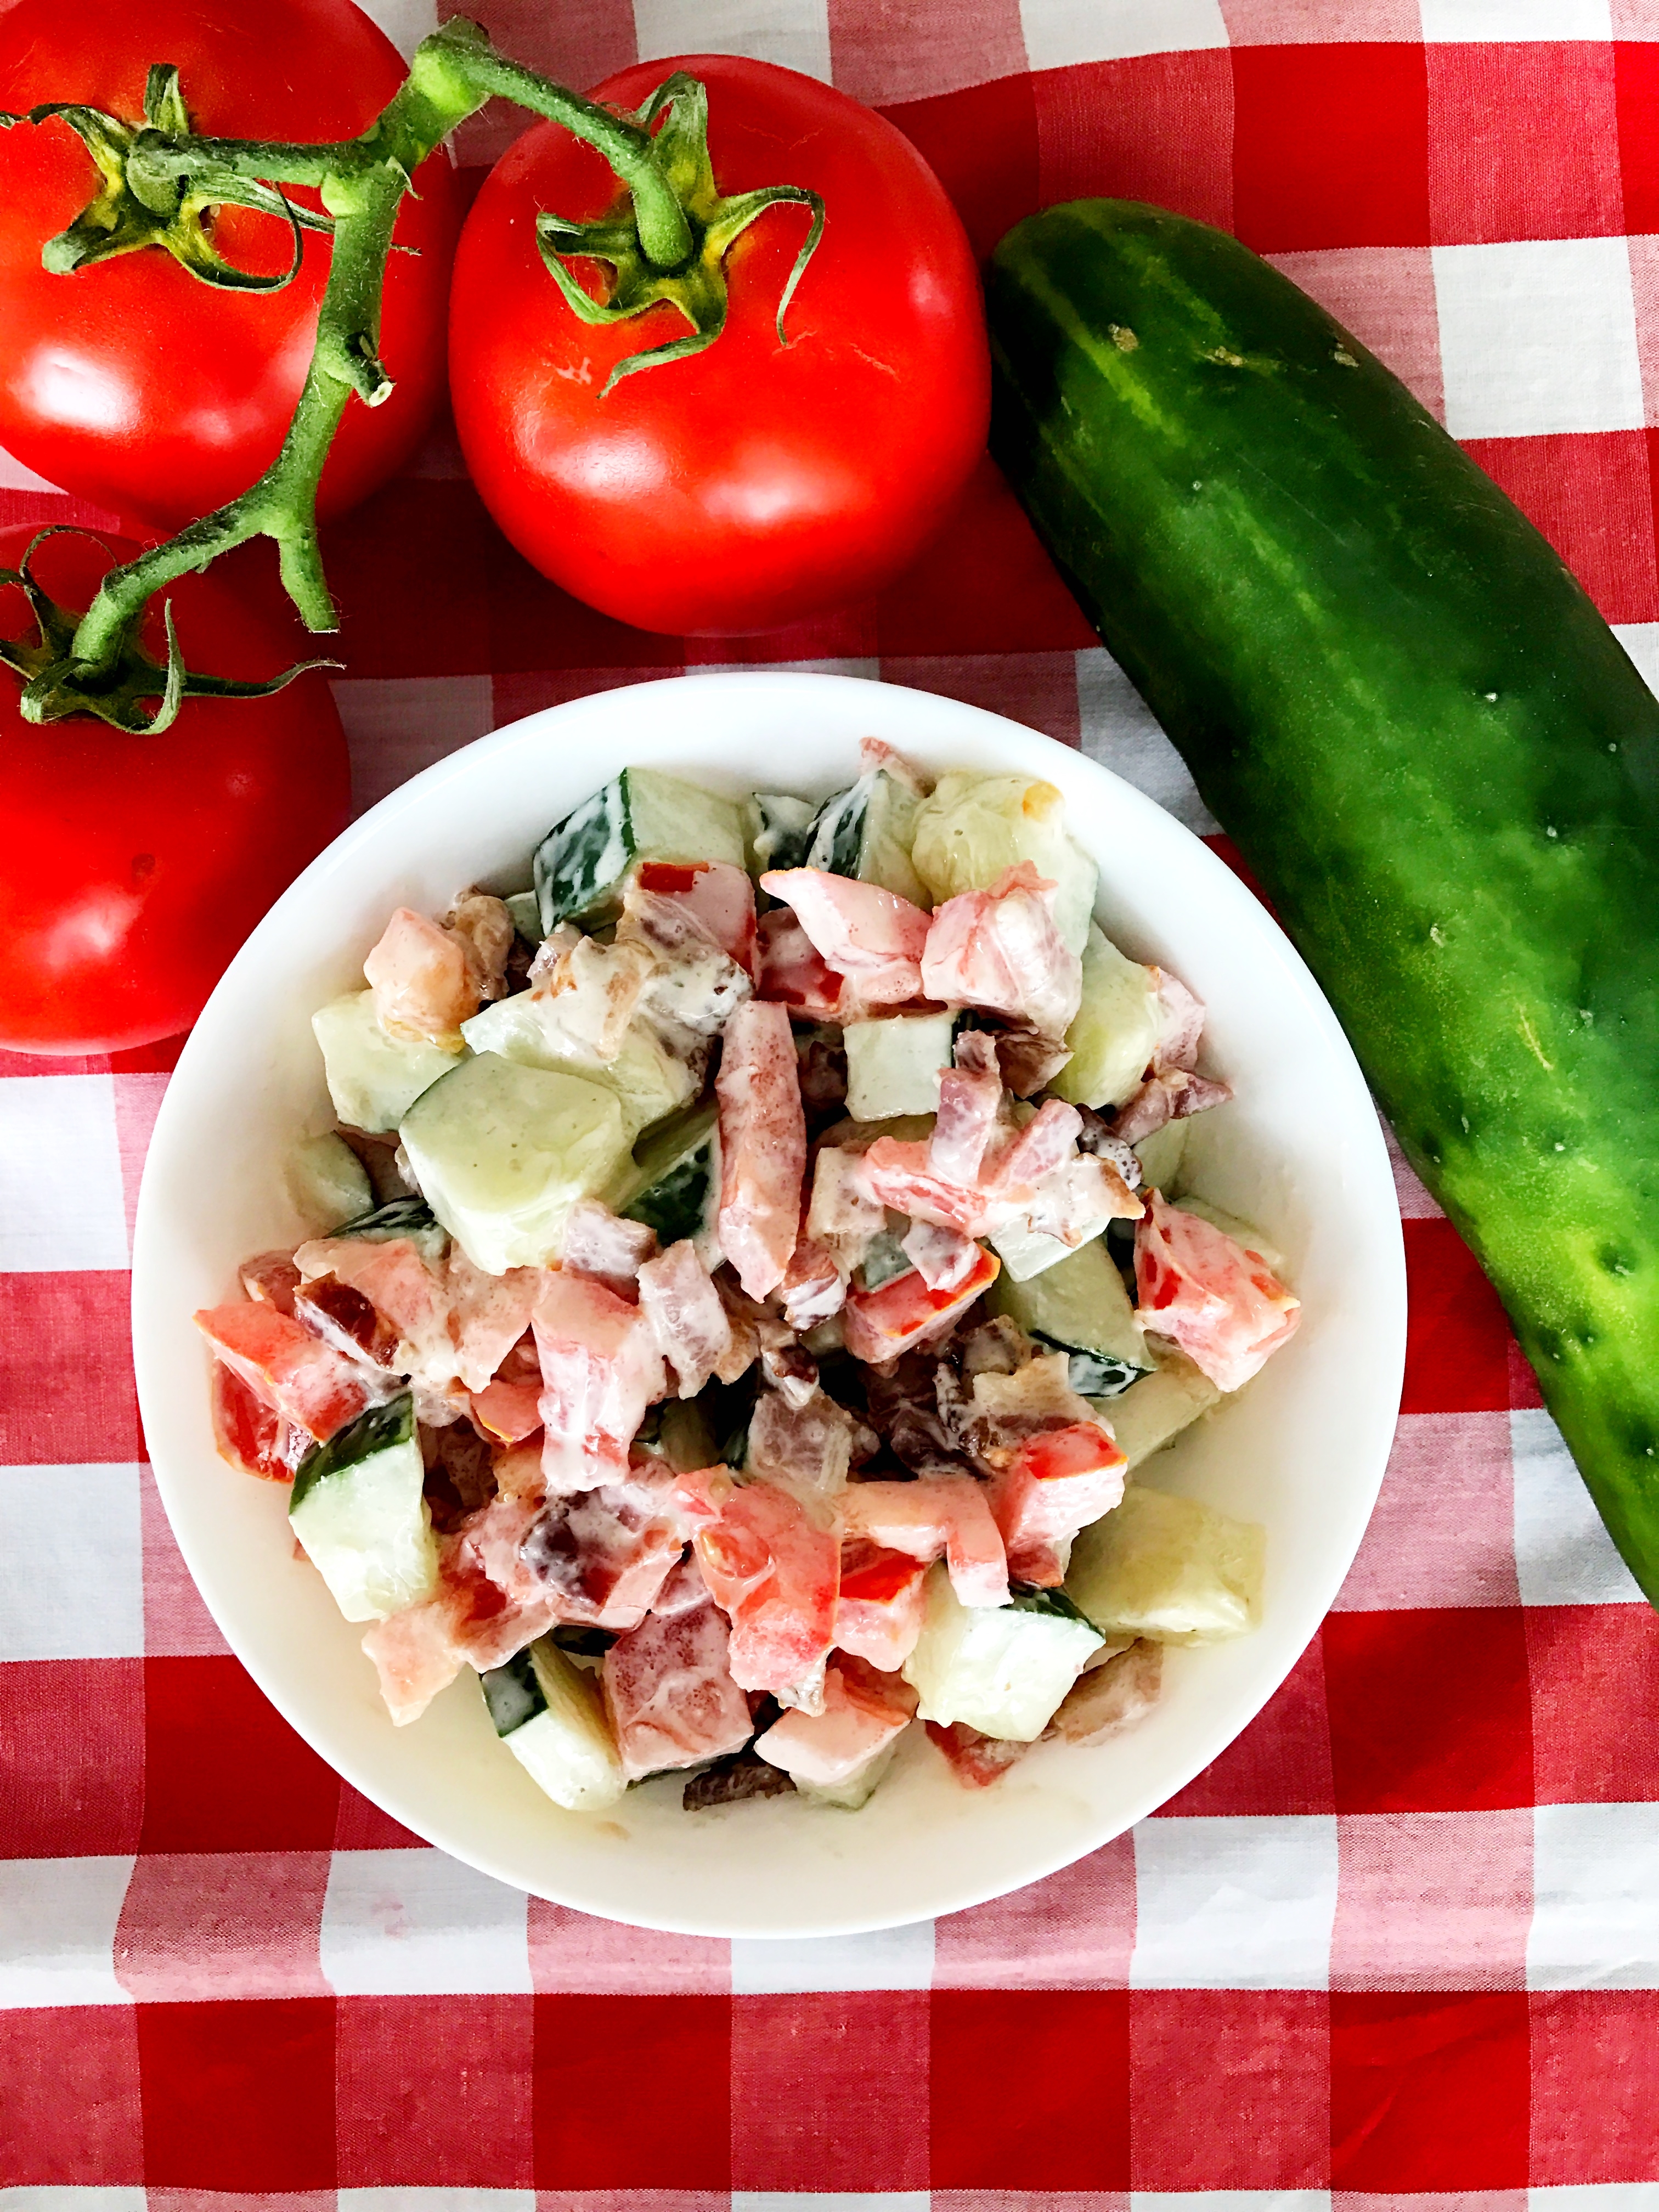 Bacon, tomato and cucumber salad